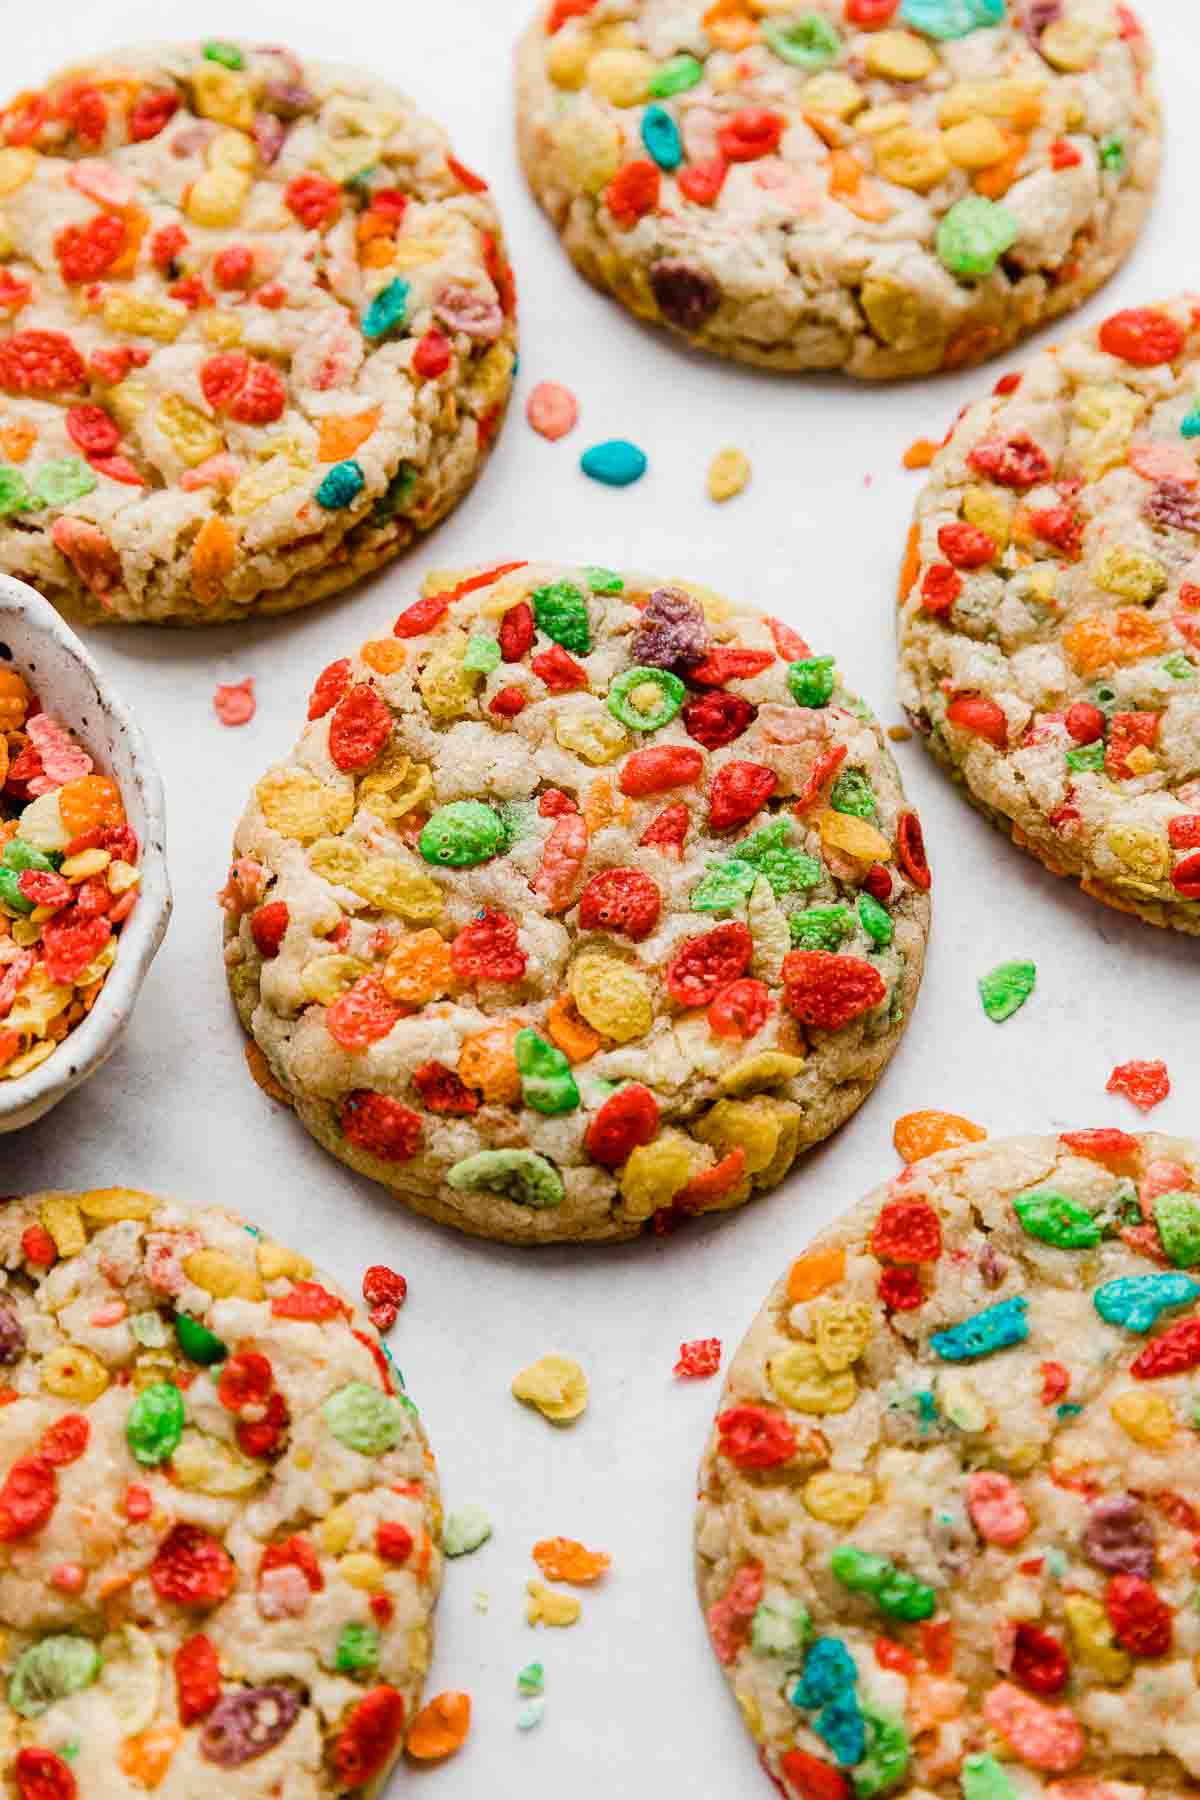 Fruity Pebbles Cookies studded with fruity pebbles cereal, on a white background.